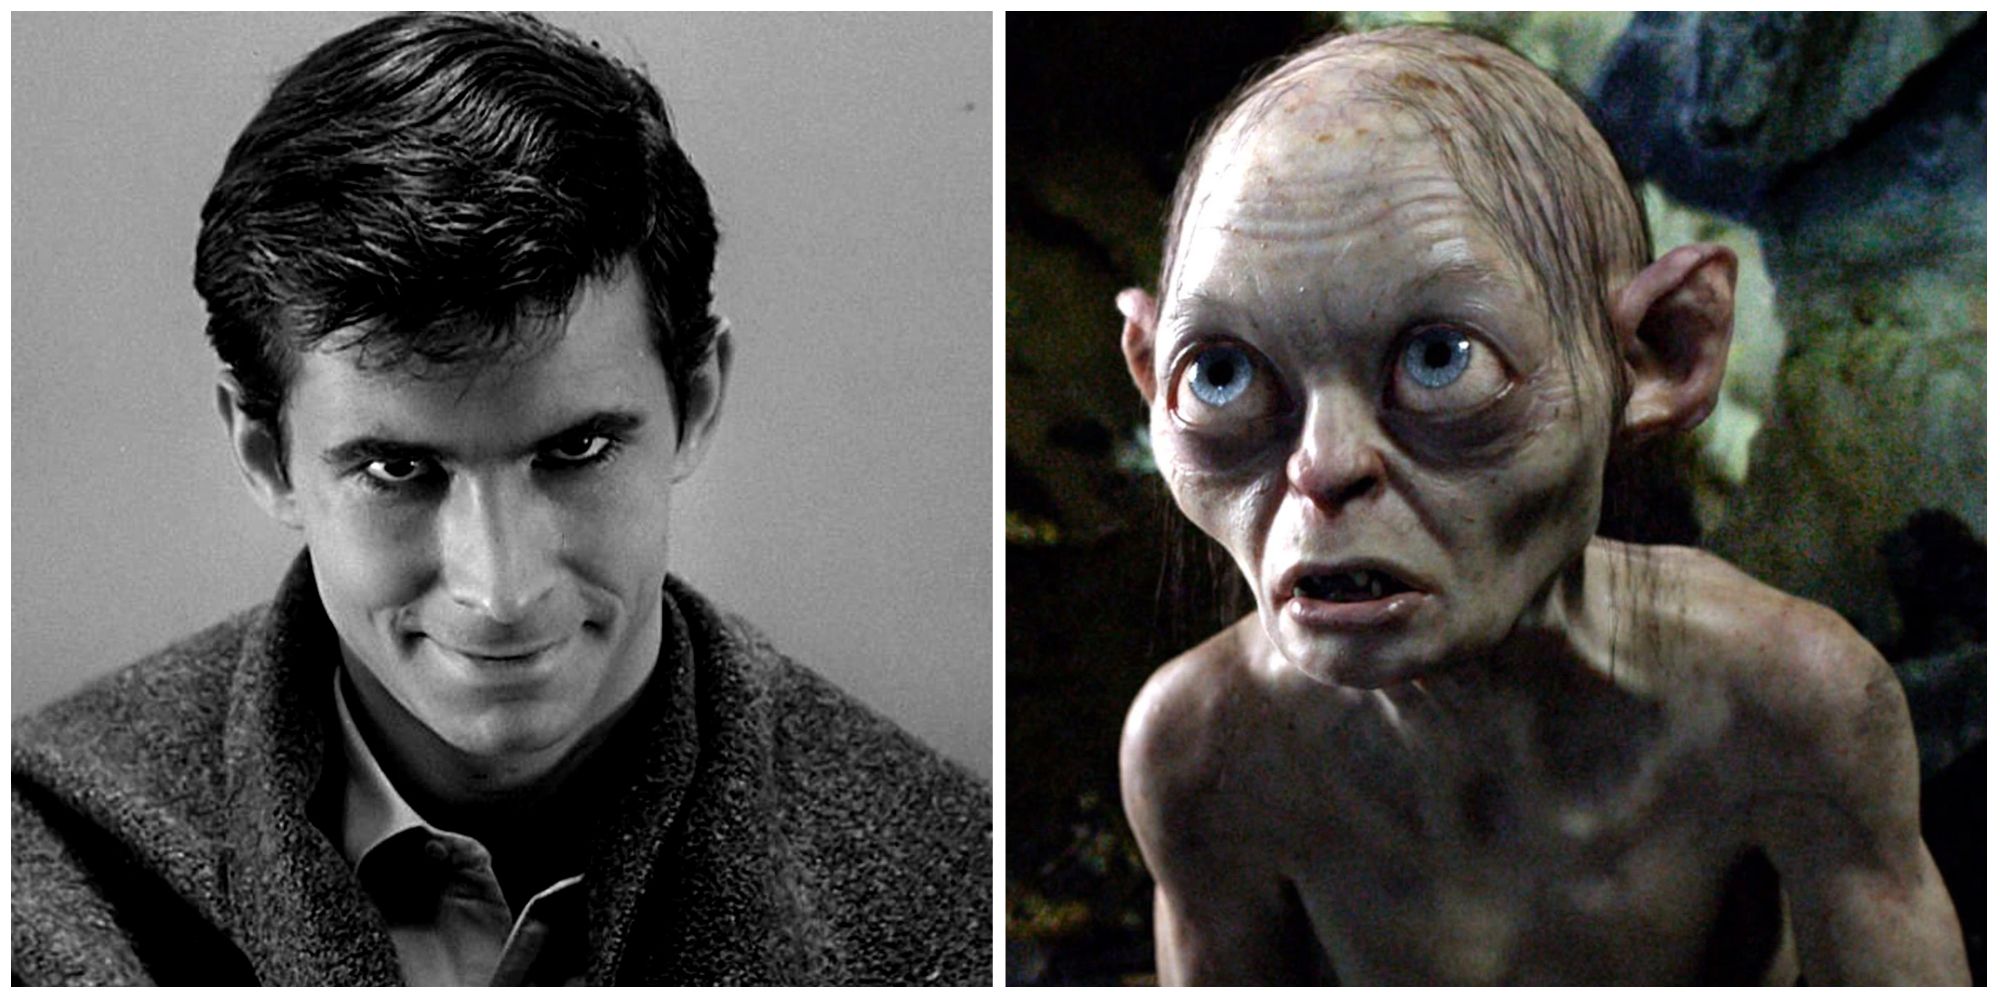 Norman Bates in Psycho and Gollum in The Lord of the Rings